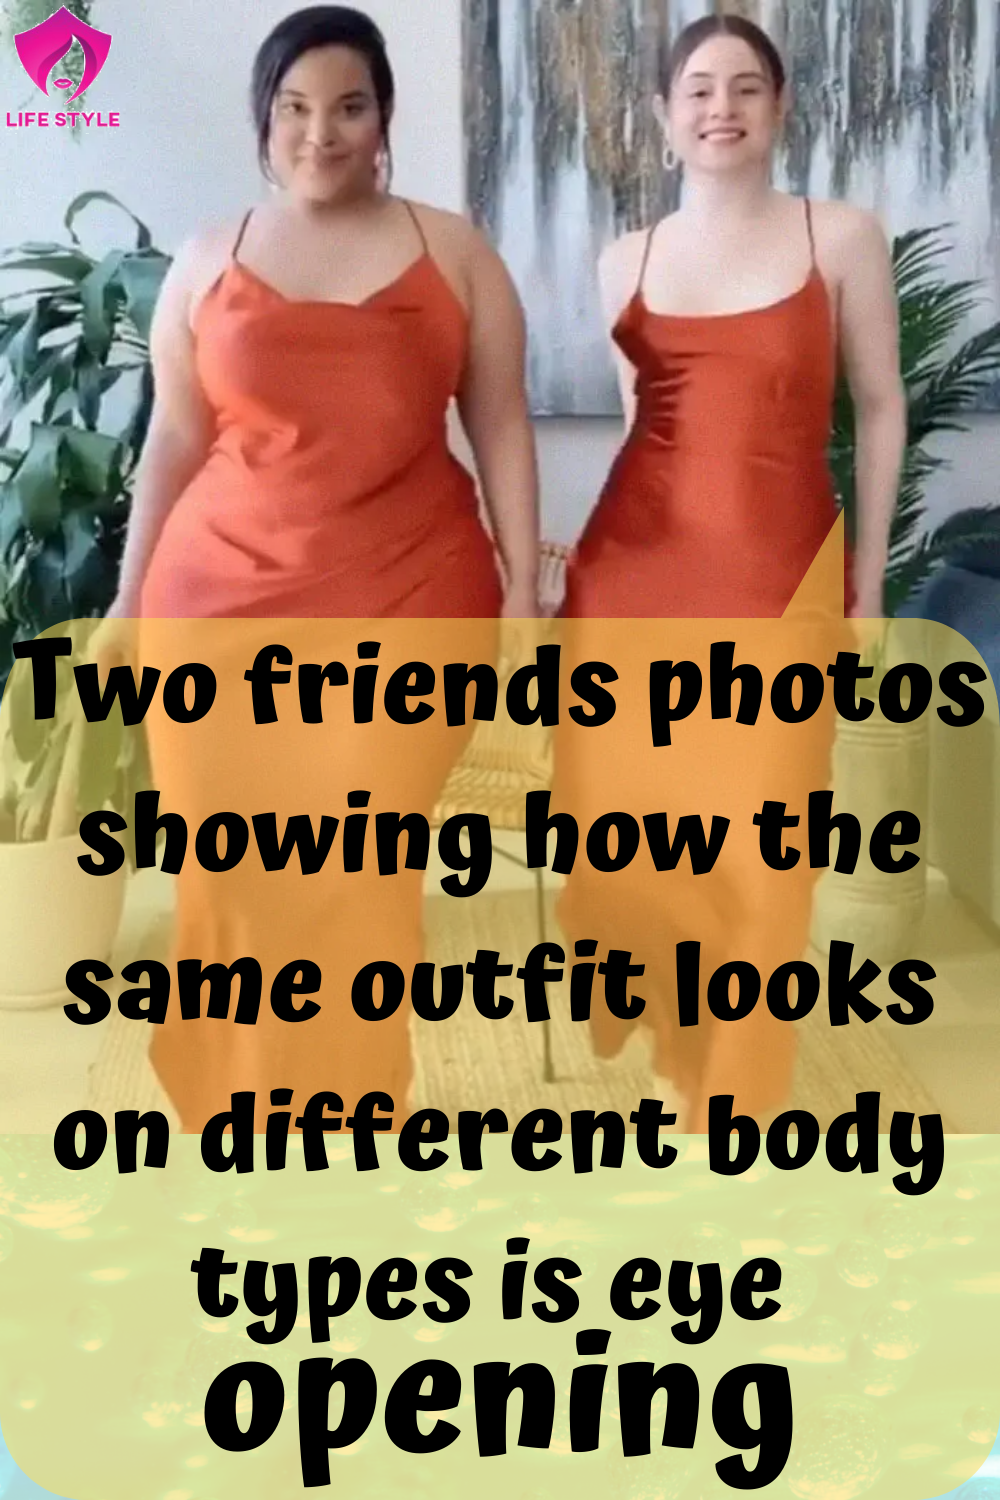 Two friends photos showing how the same outfit looks on different body types is eye opening